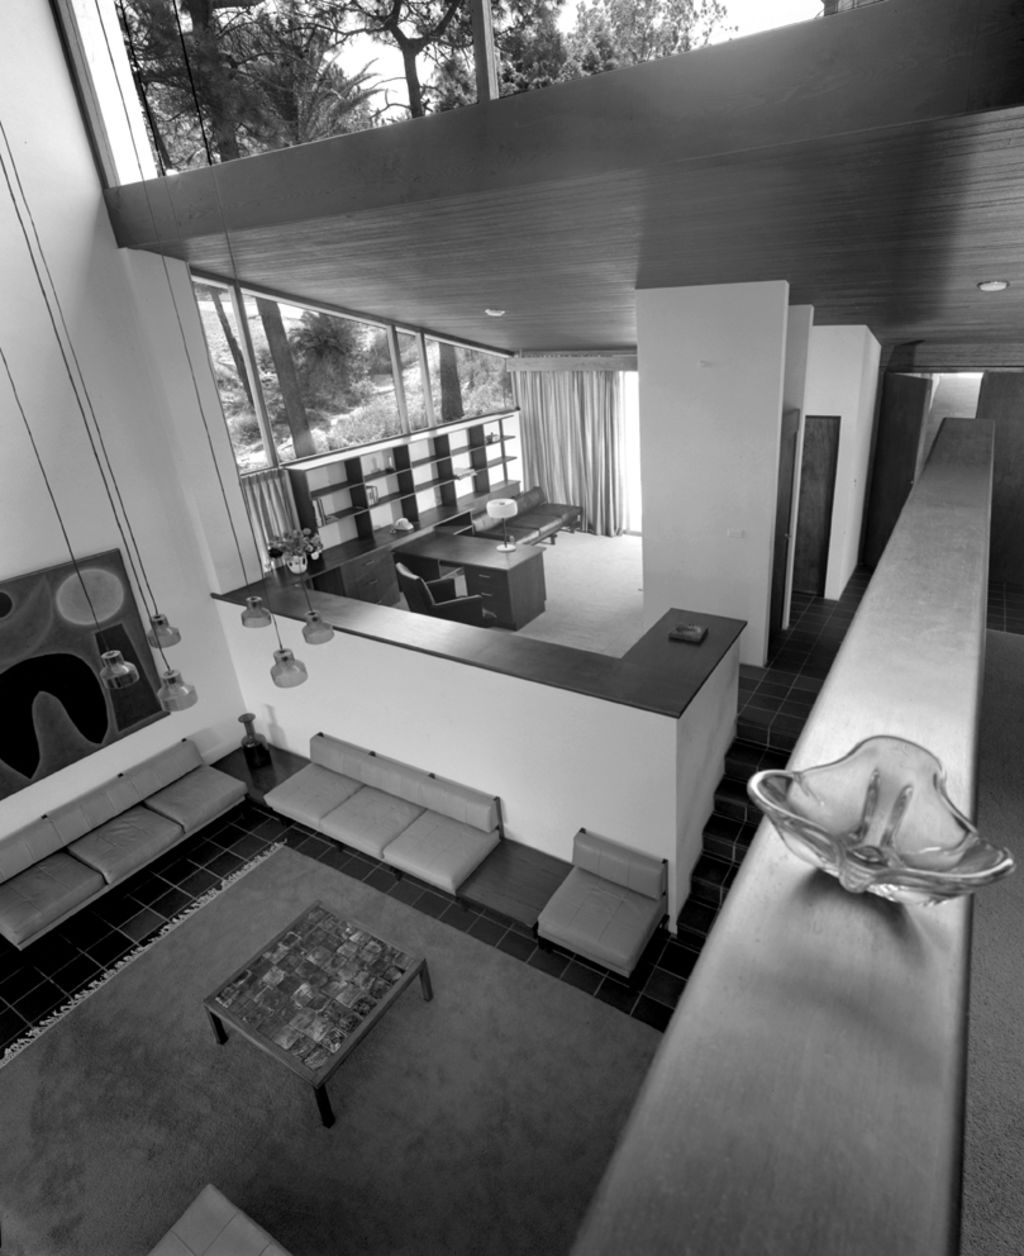 The house was designed in 1964 by architect Andre Porebski and remains one of the best examples of Sydney Modernism. Photo: Max Dupain